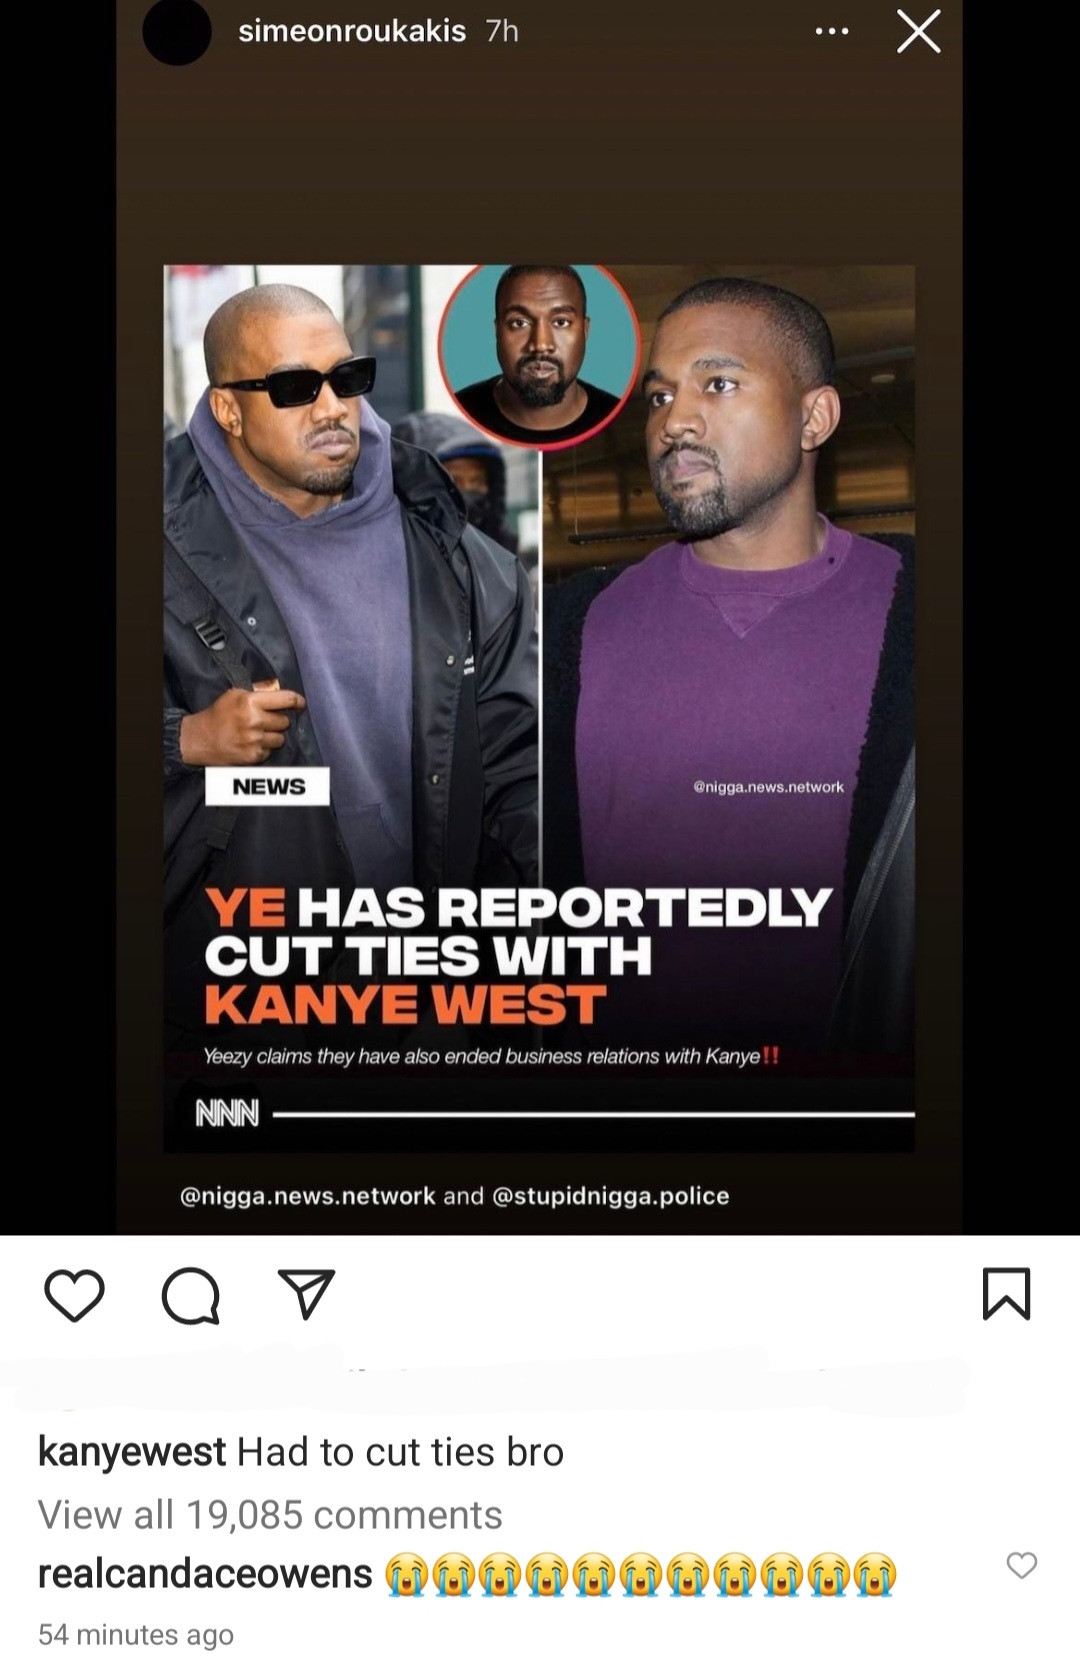 "I lost 2 billion in one day and I'm still alive" Kanye West speaks about brands cutting ties with him as he jokes that he has cut ties with himself too